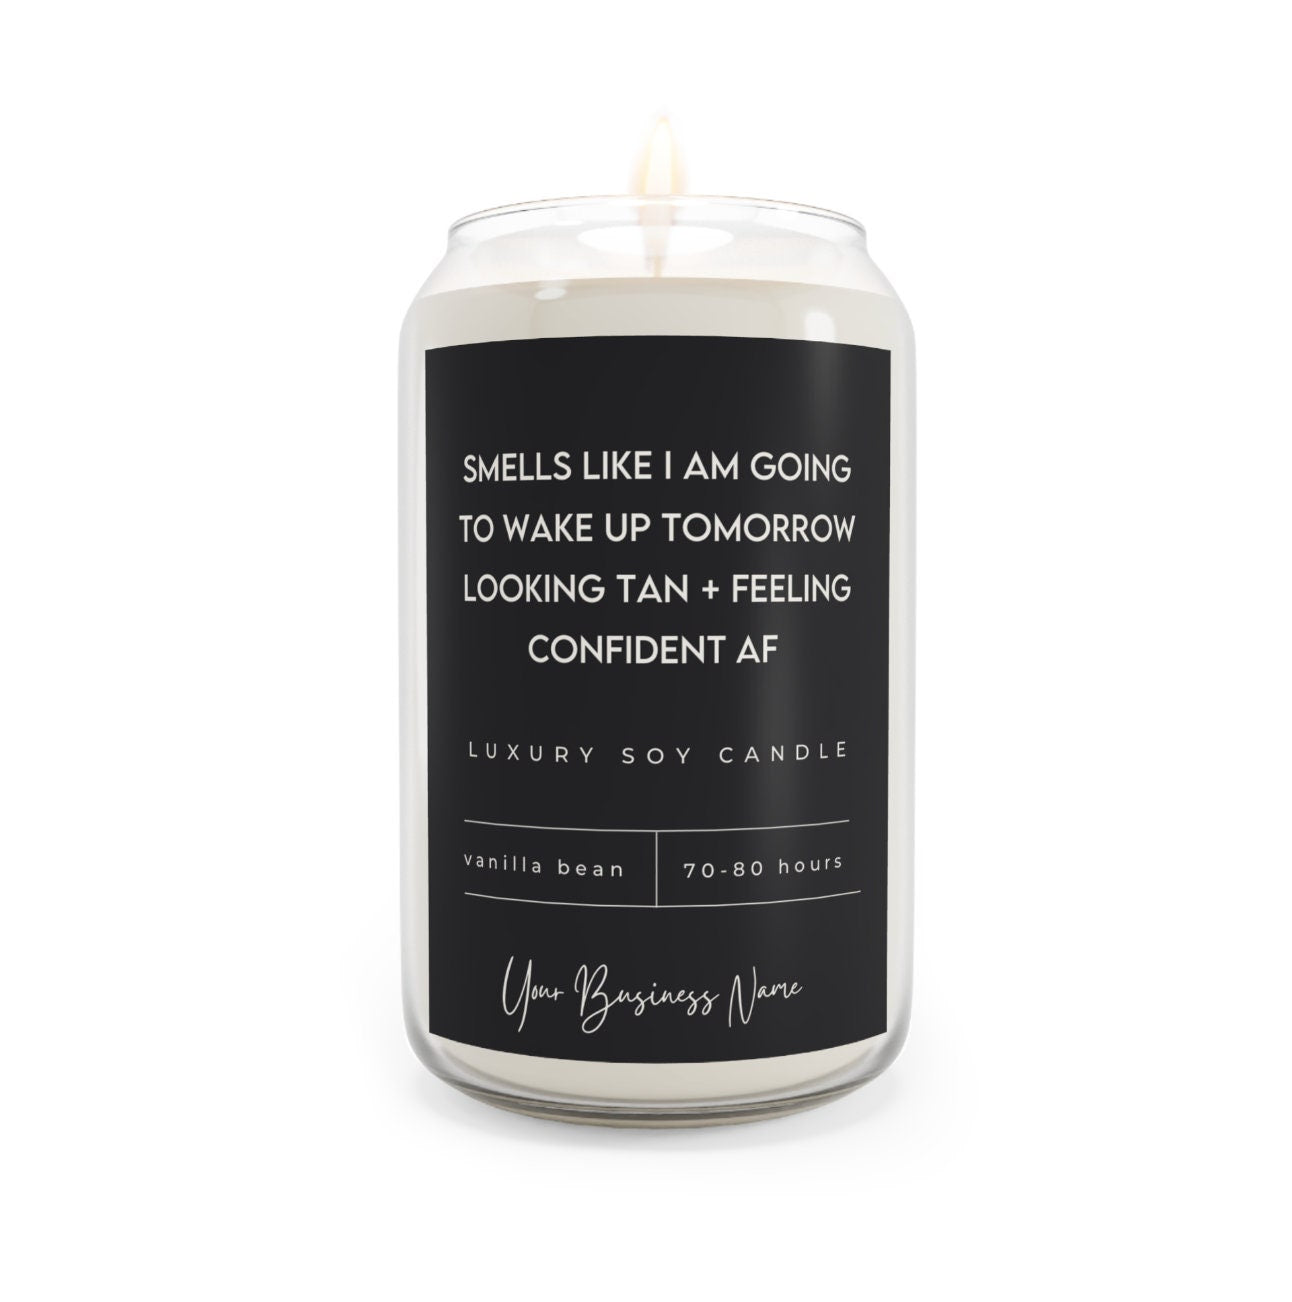 Candle For Spray Tan Salon, Spray Tan Humor, Soy Wax Candle, Studio Decor, 100% Cotton Wick, Gift For Spray Tan Business Owner or Client